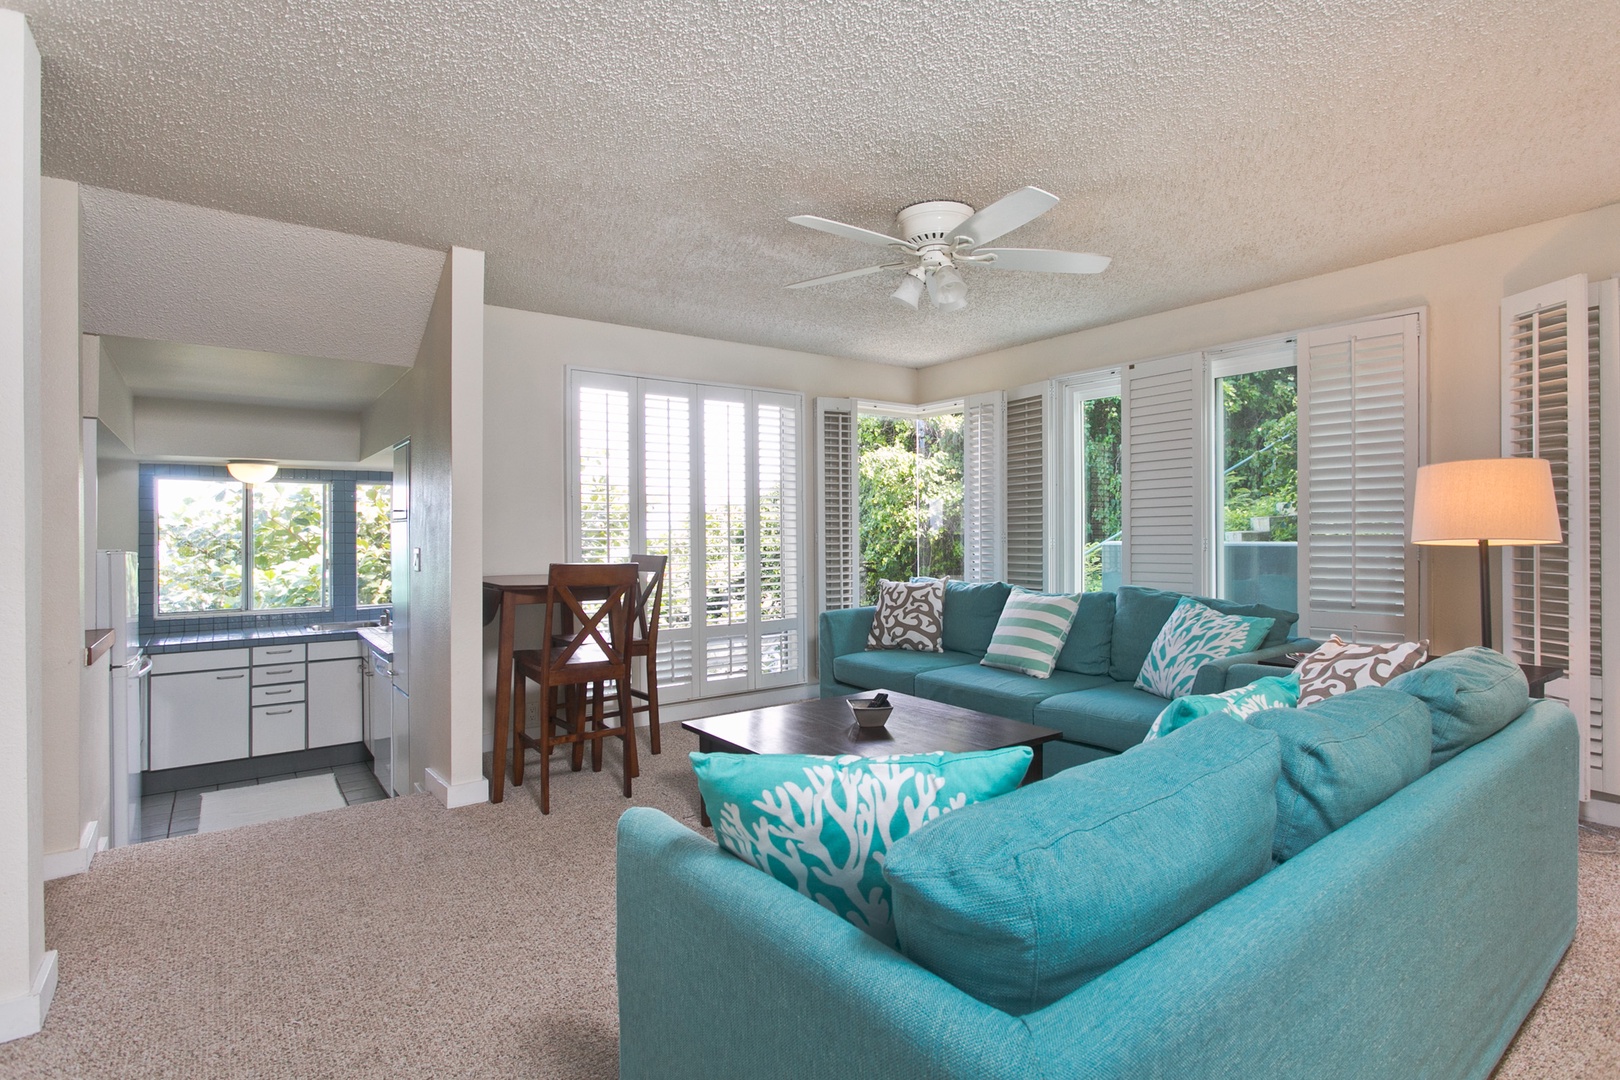 Kailua Vacation Rentals, Lanikai Village* - Hale Kolea: Primary suite comes with a lounge area with plenty of seats, dinette, and a mini-kitchen.